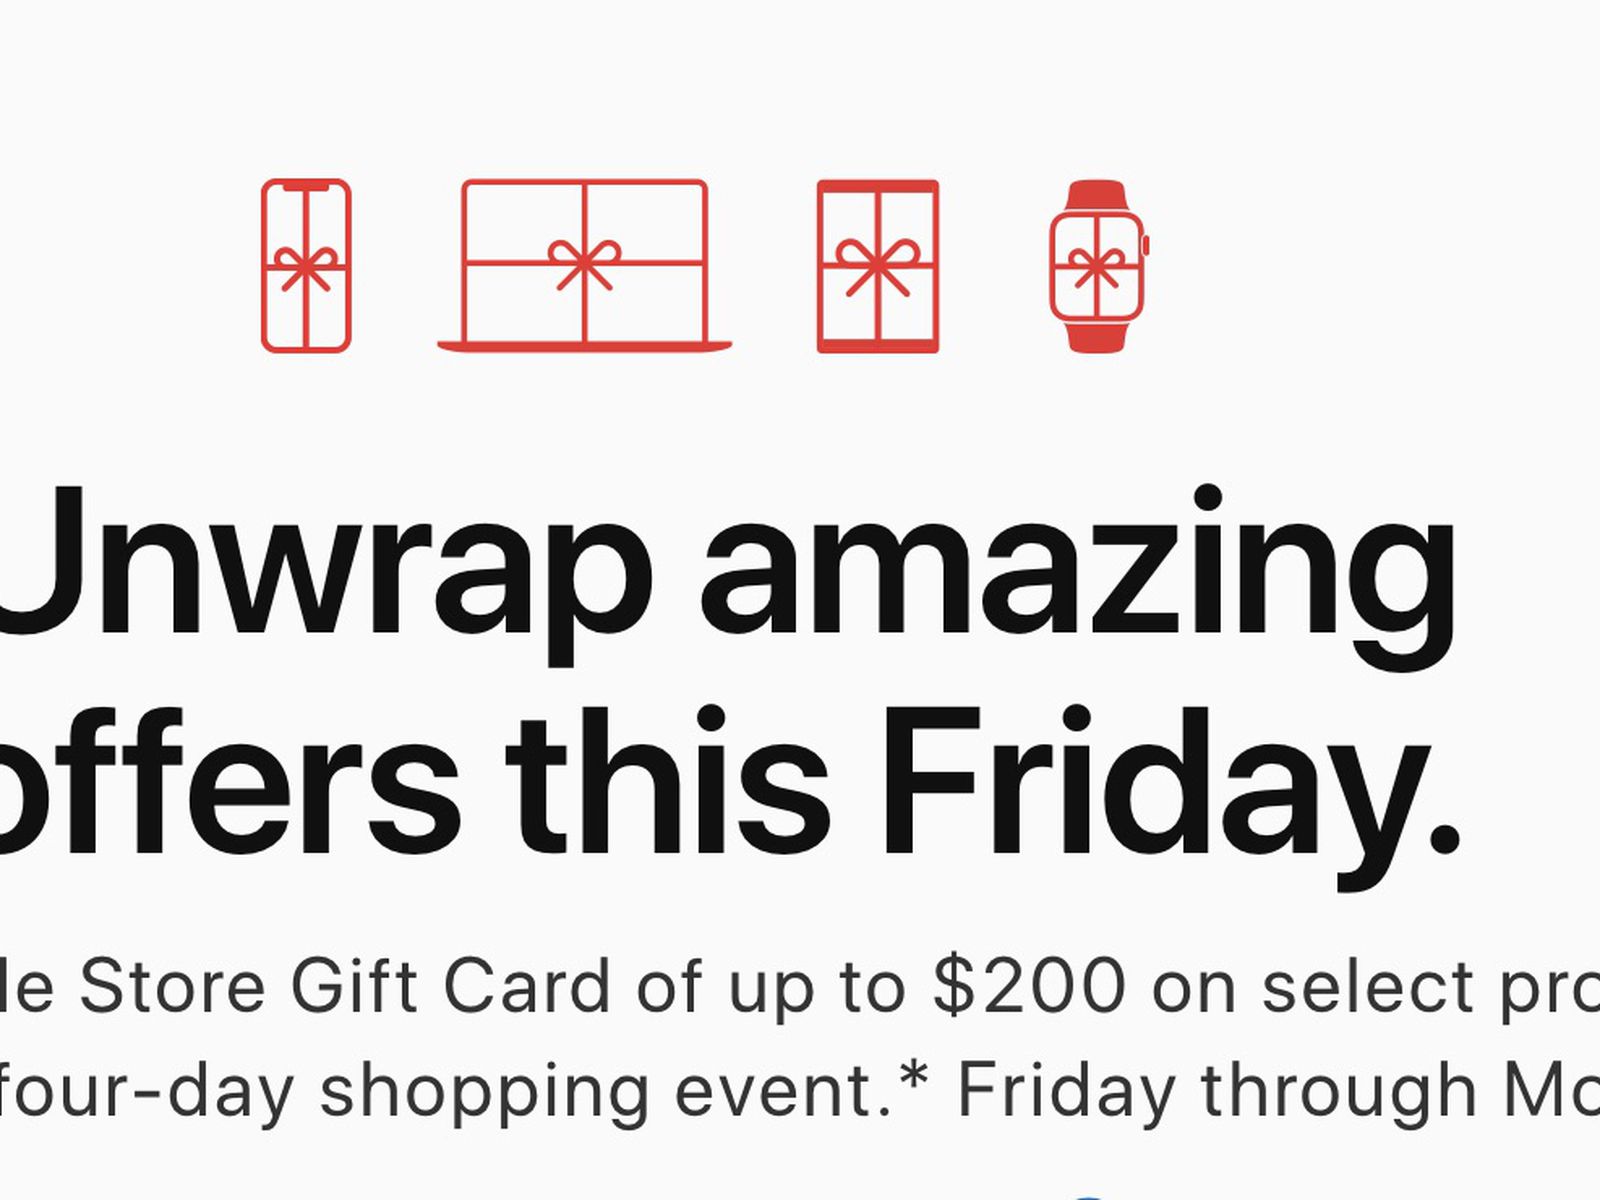 Apple Store hands out $200 gift cards during Black Friday/Cyber Monday sale